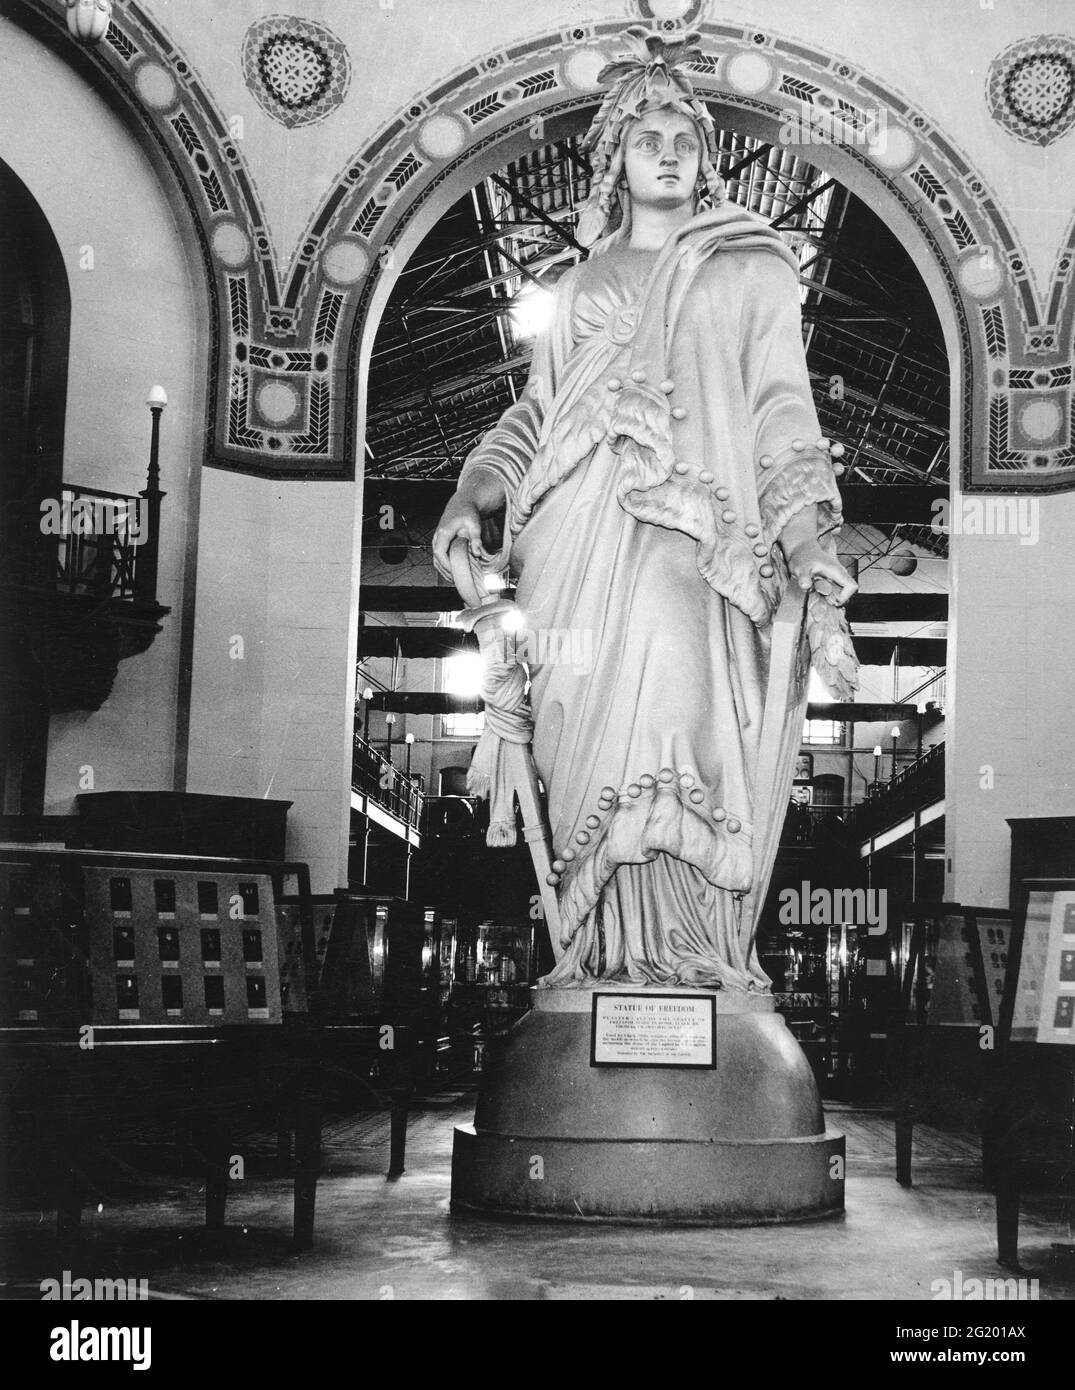 Plaster cast of the bronze Statue of Freedom made by sculptor Thomas Crawford in 1860 to top the dome of the United States Capitol. The cast is shown here in the Arts & Industries Building of the Smithsonian Institution where it was exhibited from 1900-1967, Washington, DC. (Photo by Harris & Ewing/RBM Vintage Images) Stock Photo